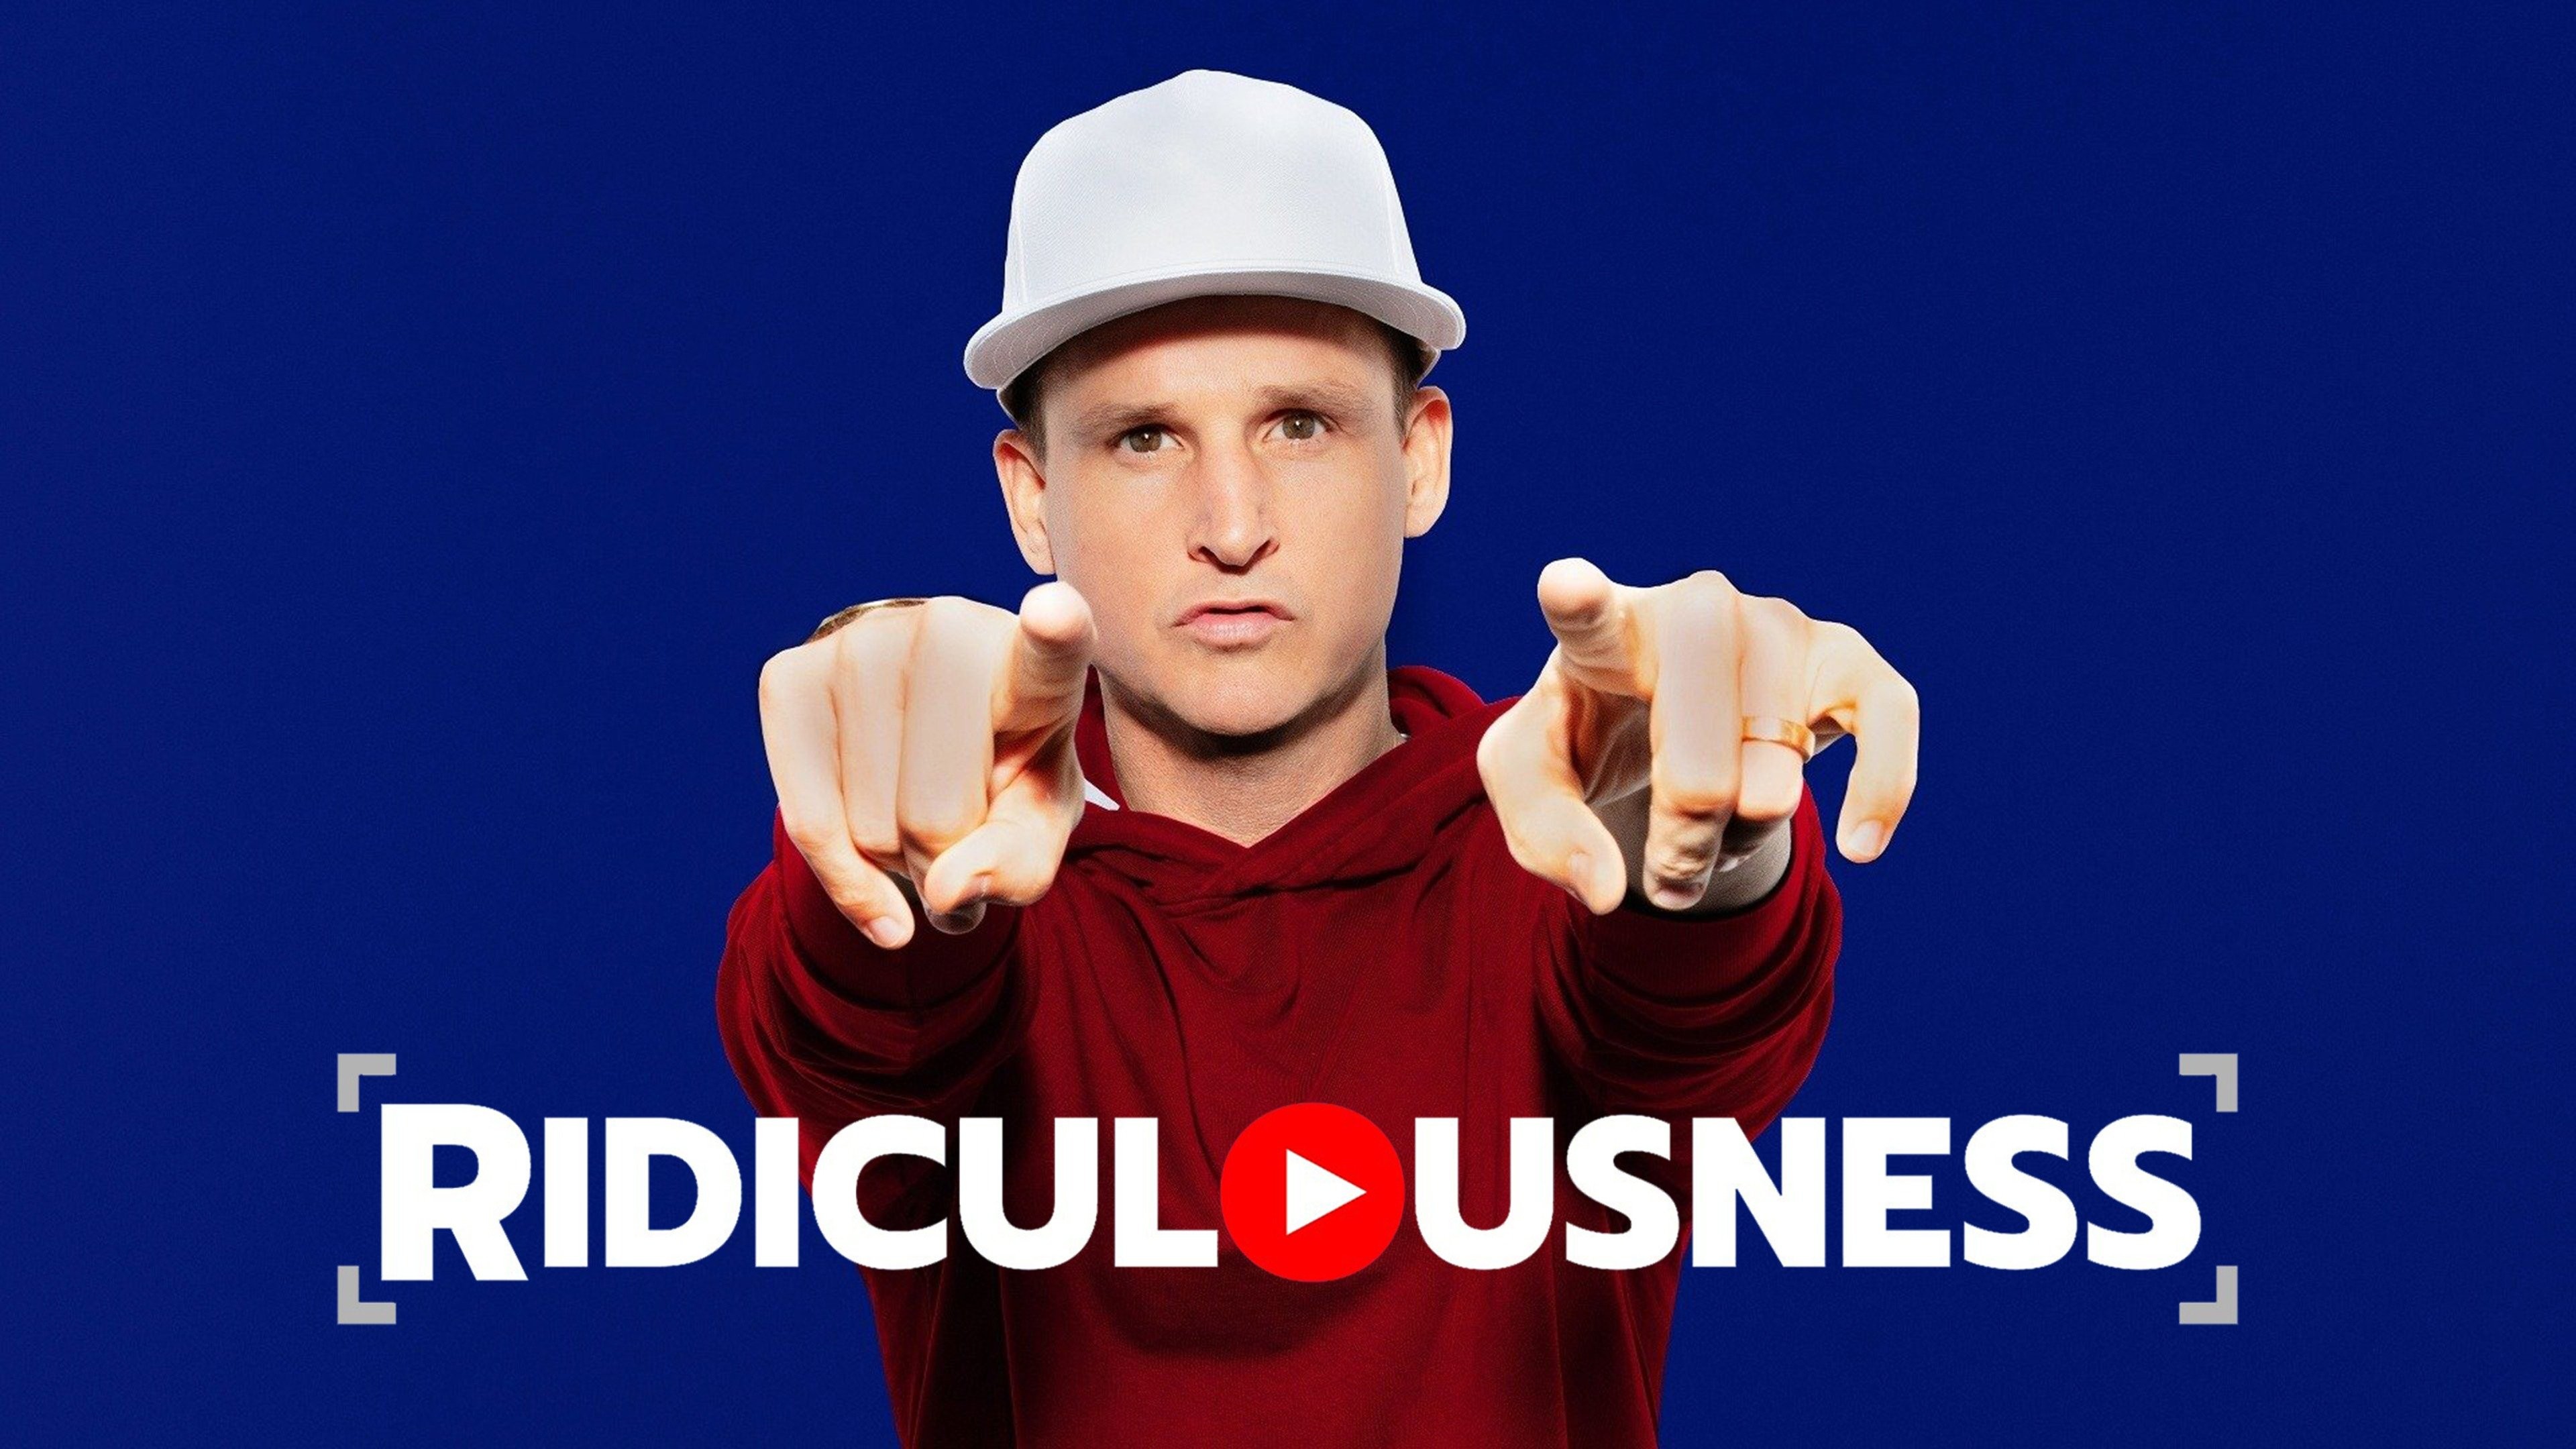 Watch Ridiculousness season 3 episode 13 streaming online | BetaSeries.com